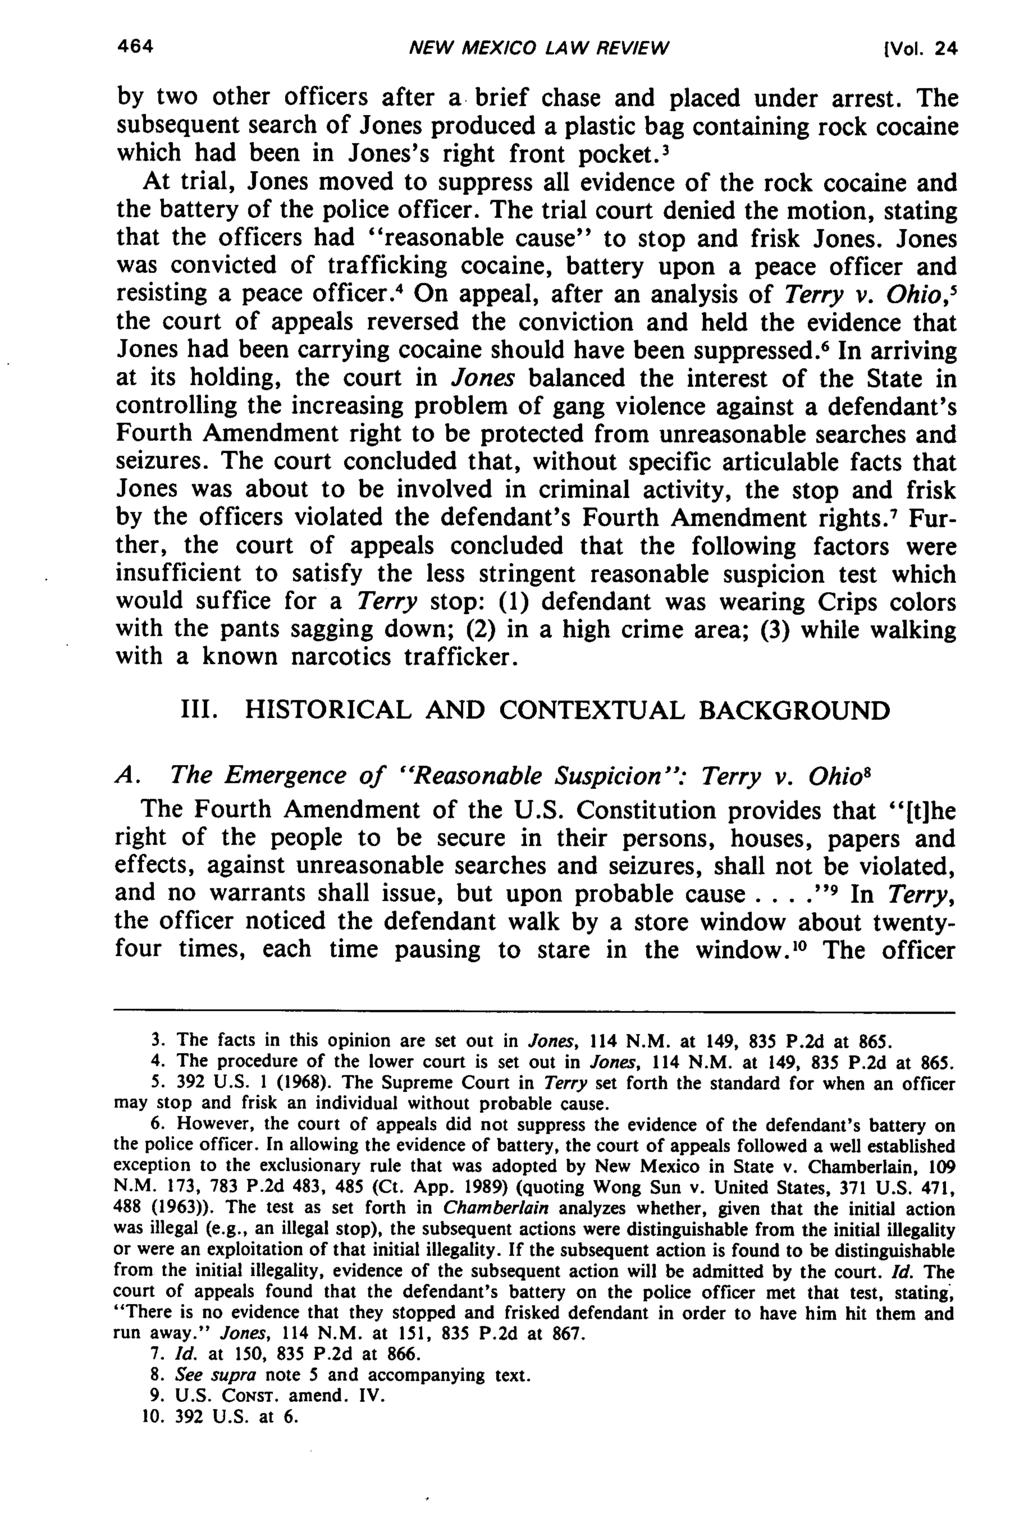 NEW MEXICO LAW REVIEW (Vol. 24 by two other officers after a brief chase and placed under arrest.